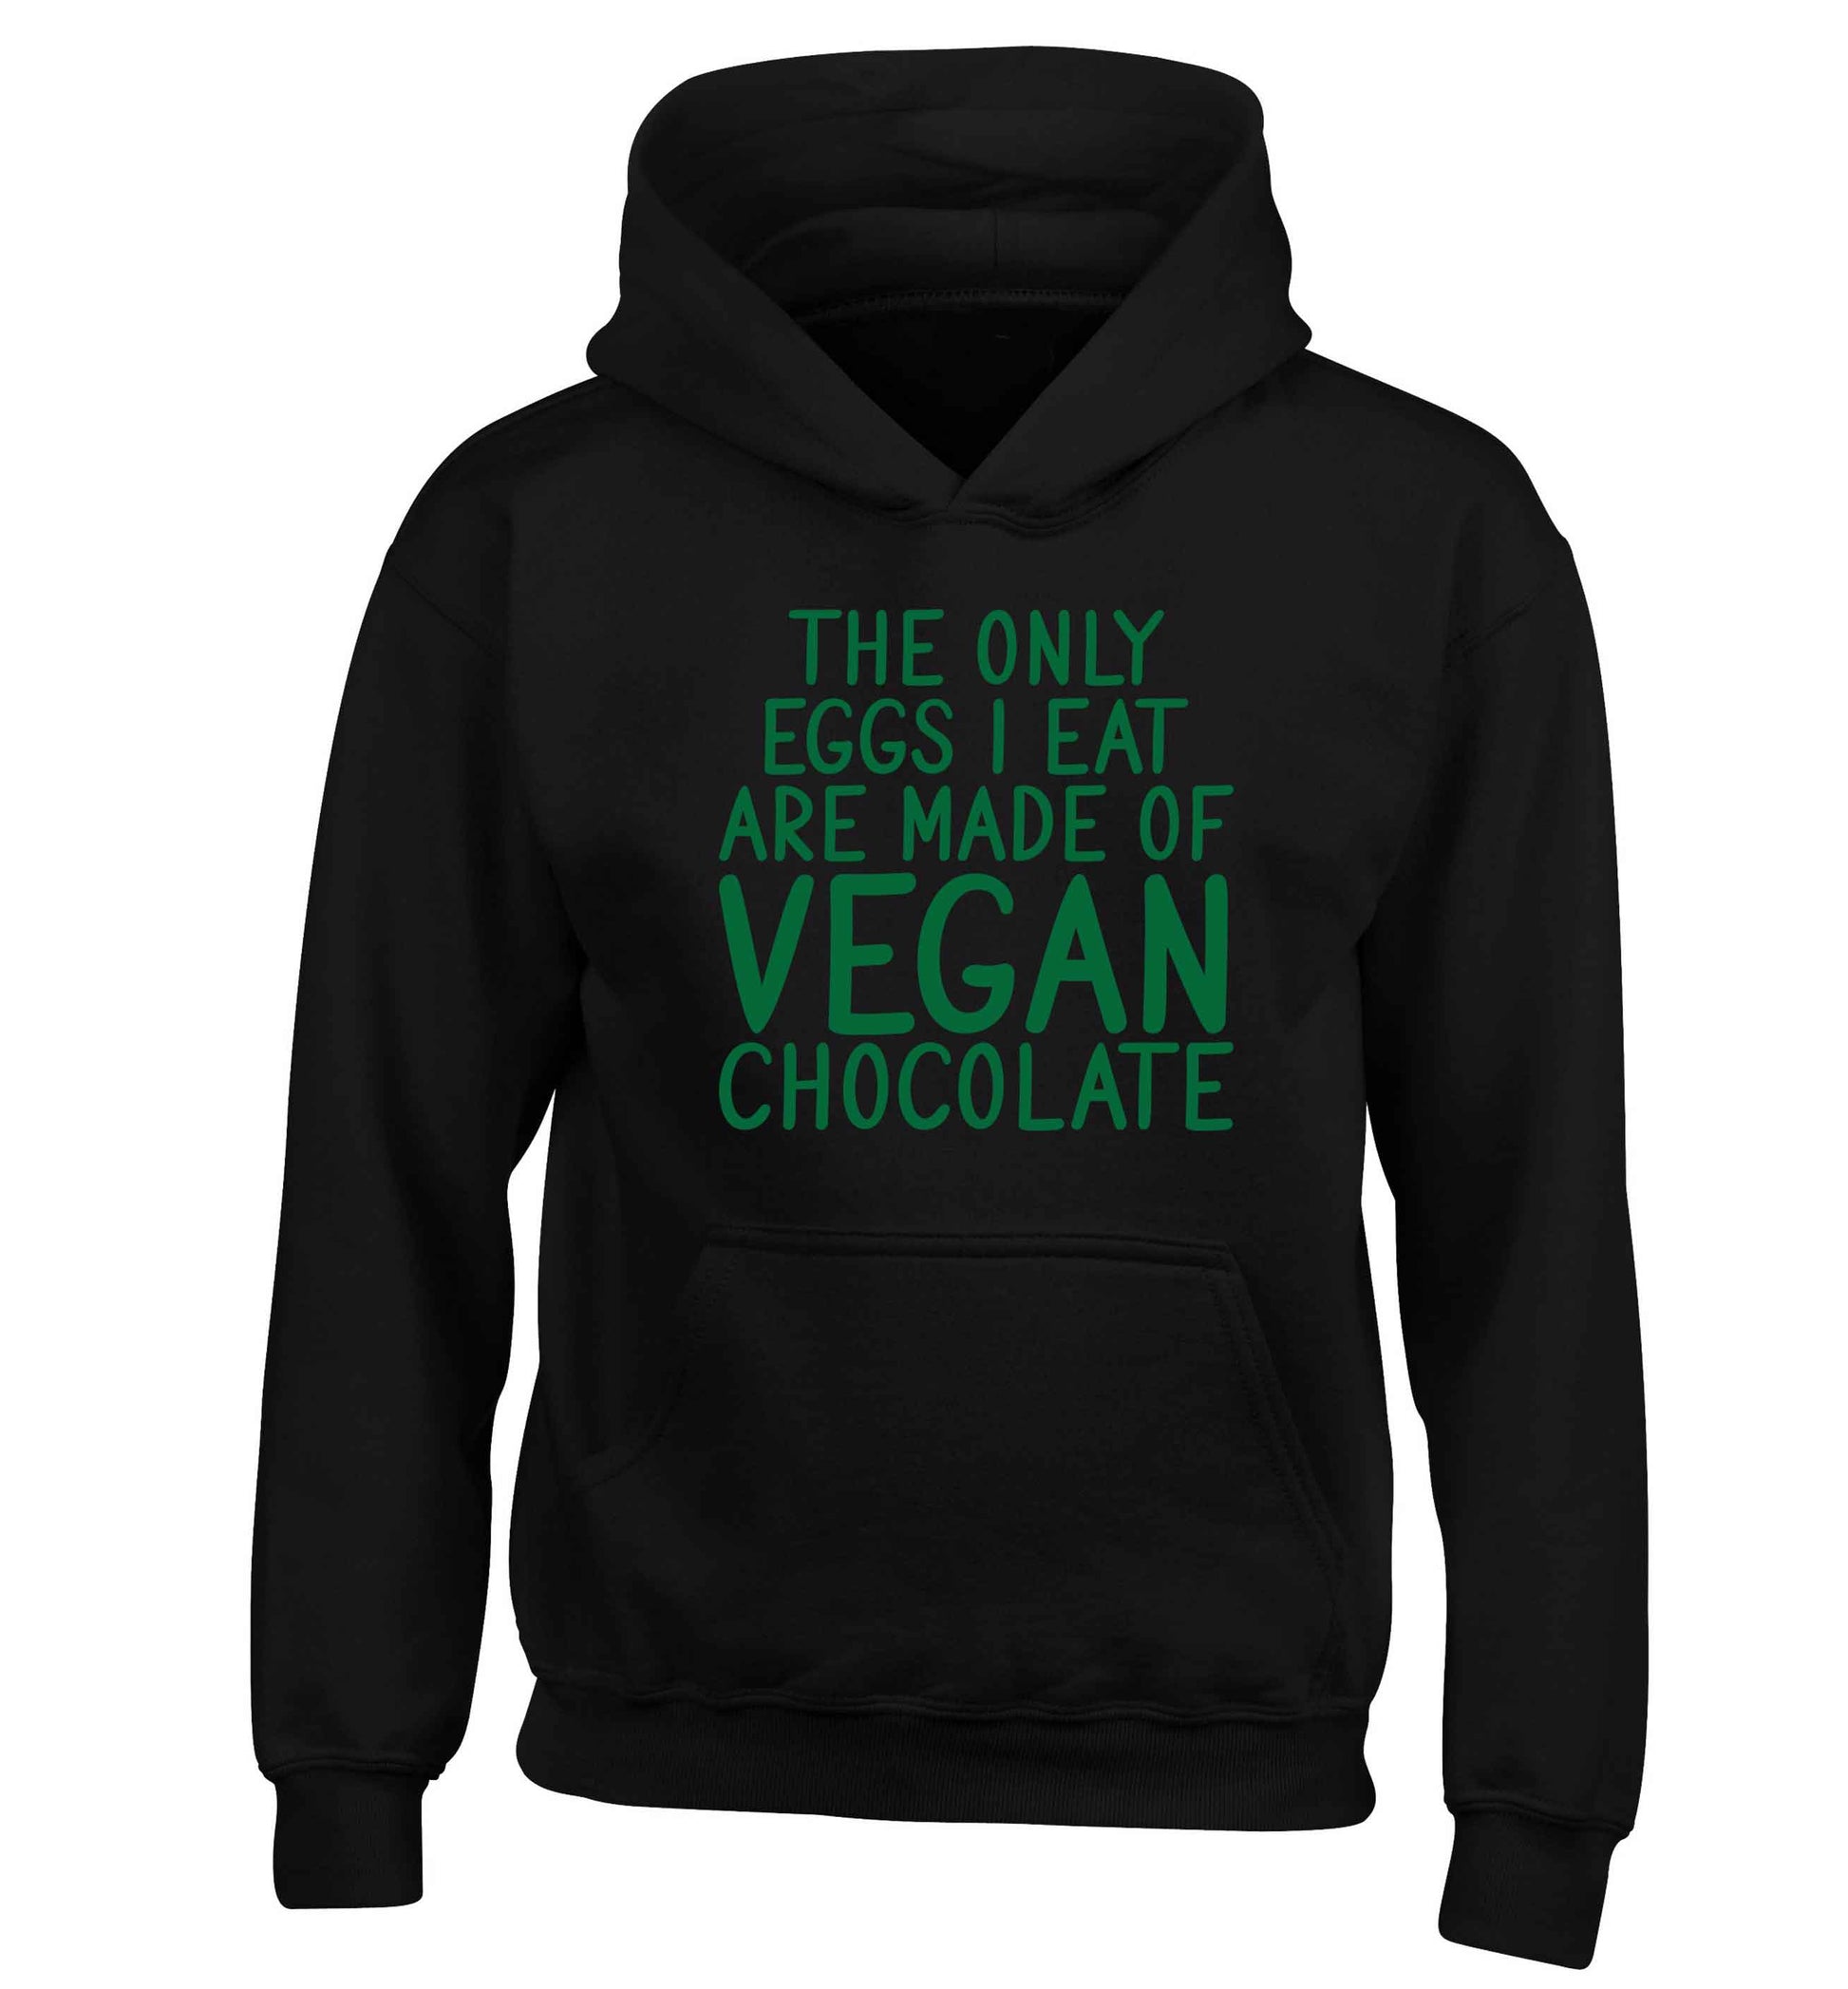 The only eggs I eat are made of vegan chocolate children's black hoodie 12-13 Years